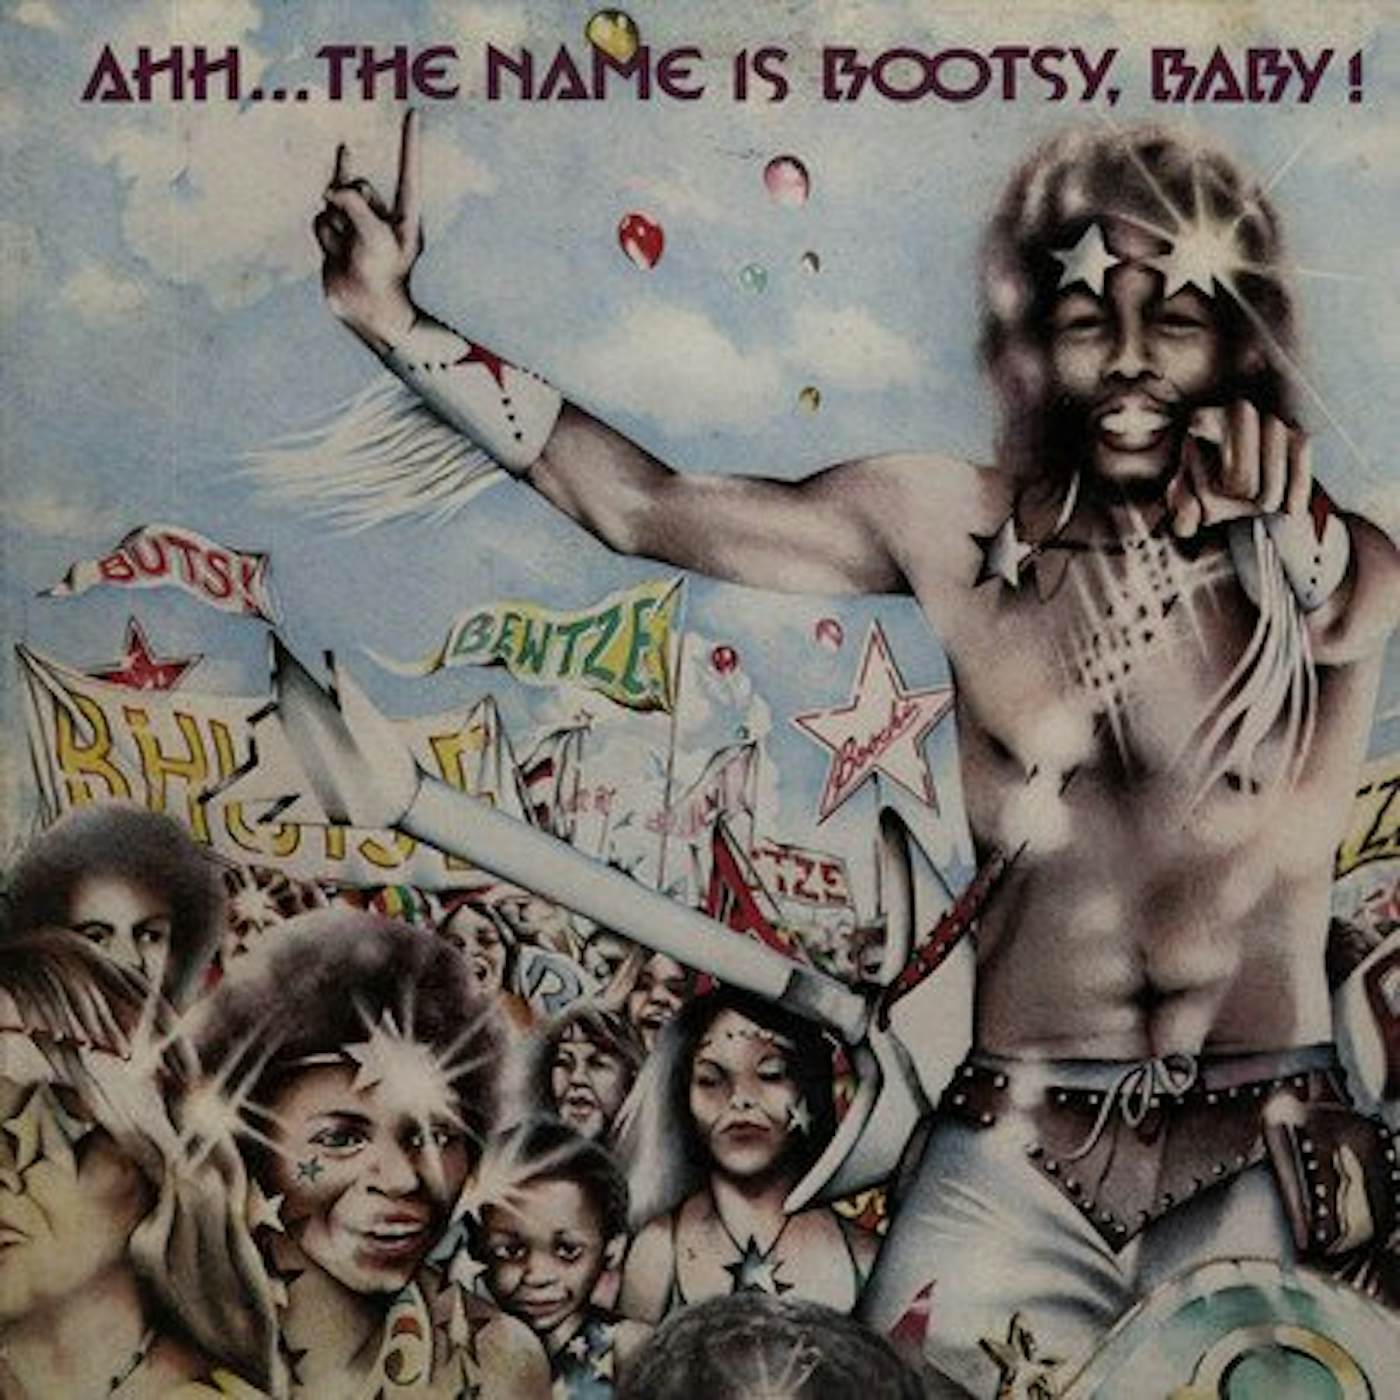 Bootsy's Rubber Band AHH THE NAME IS BOOTSY BABY Vinyl Record